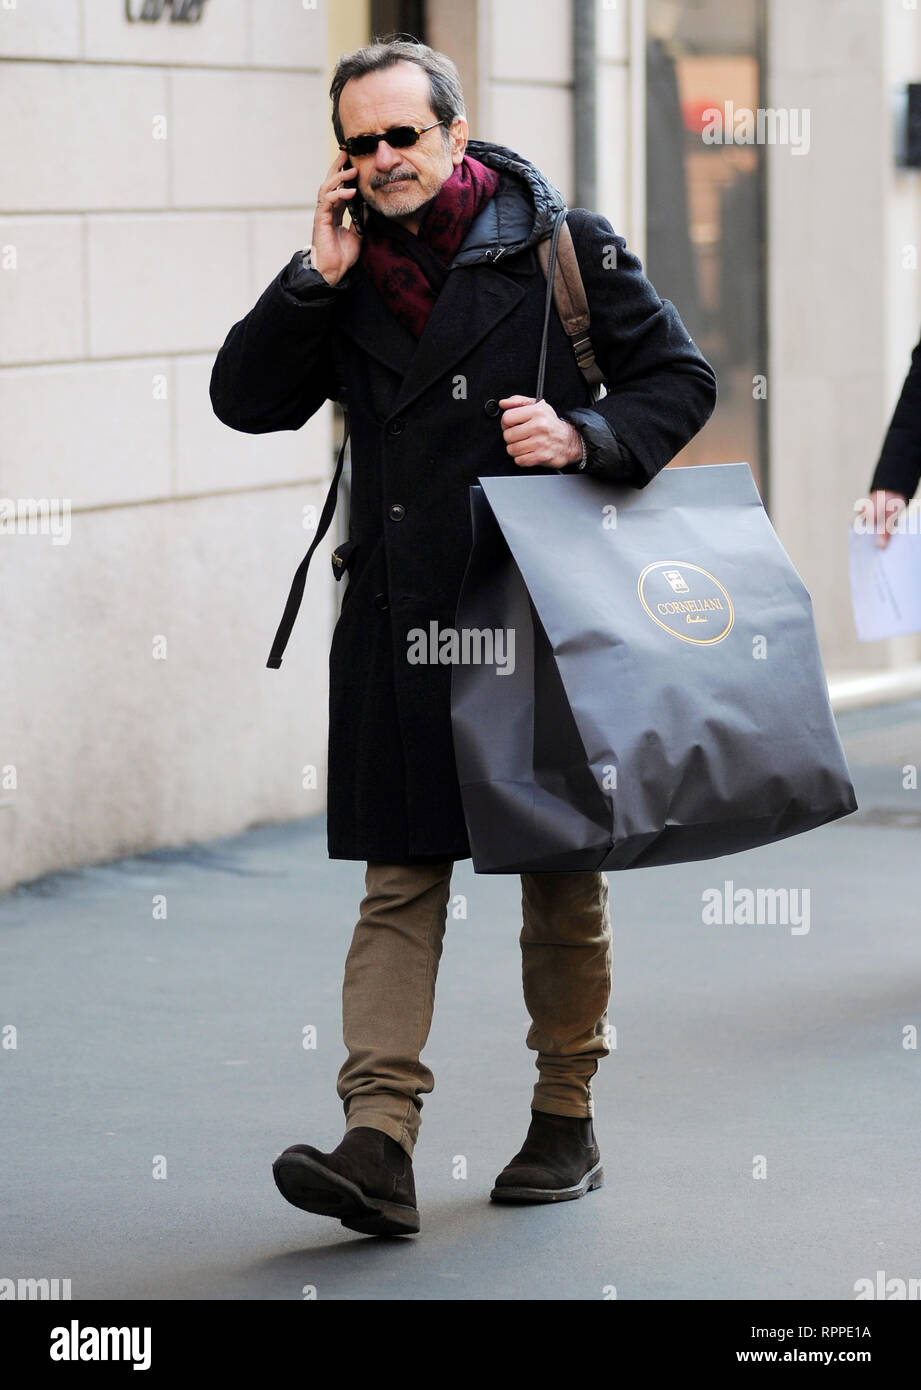 Rocco Papaleo shopping in downtown Milan  Featuring: Rocco Papaleo Where: Milan, Italy When: 22 Jan 2019 Credit: IPA/WENN.com  **Only available for publication in UK, USA, Germany, Austria, Switzerland** Stock Photo